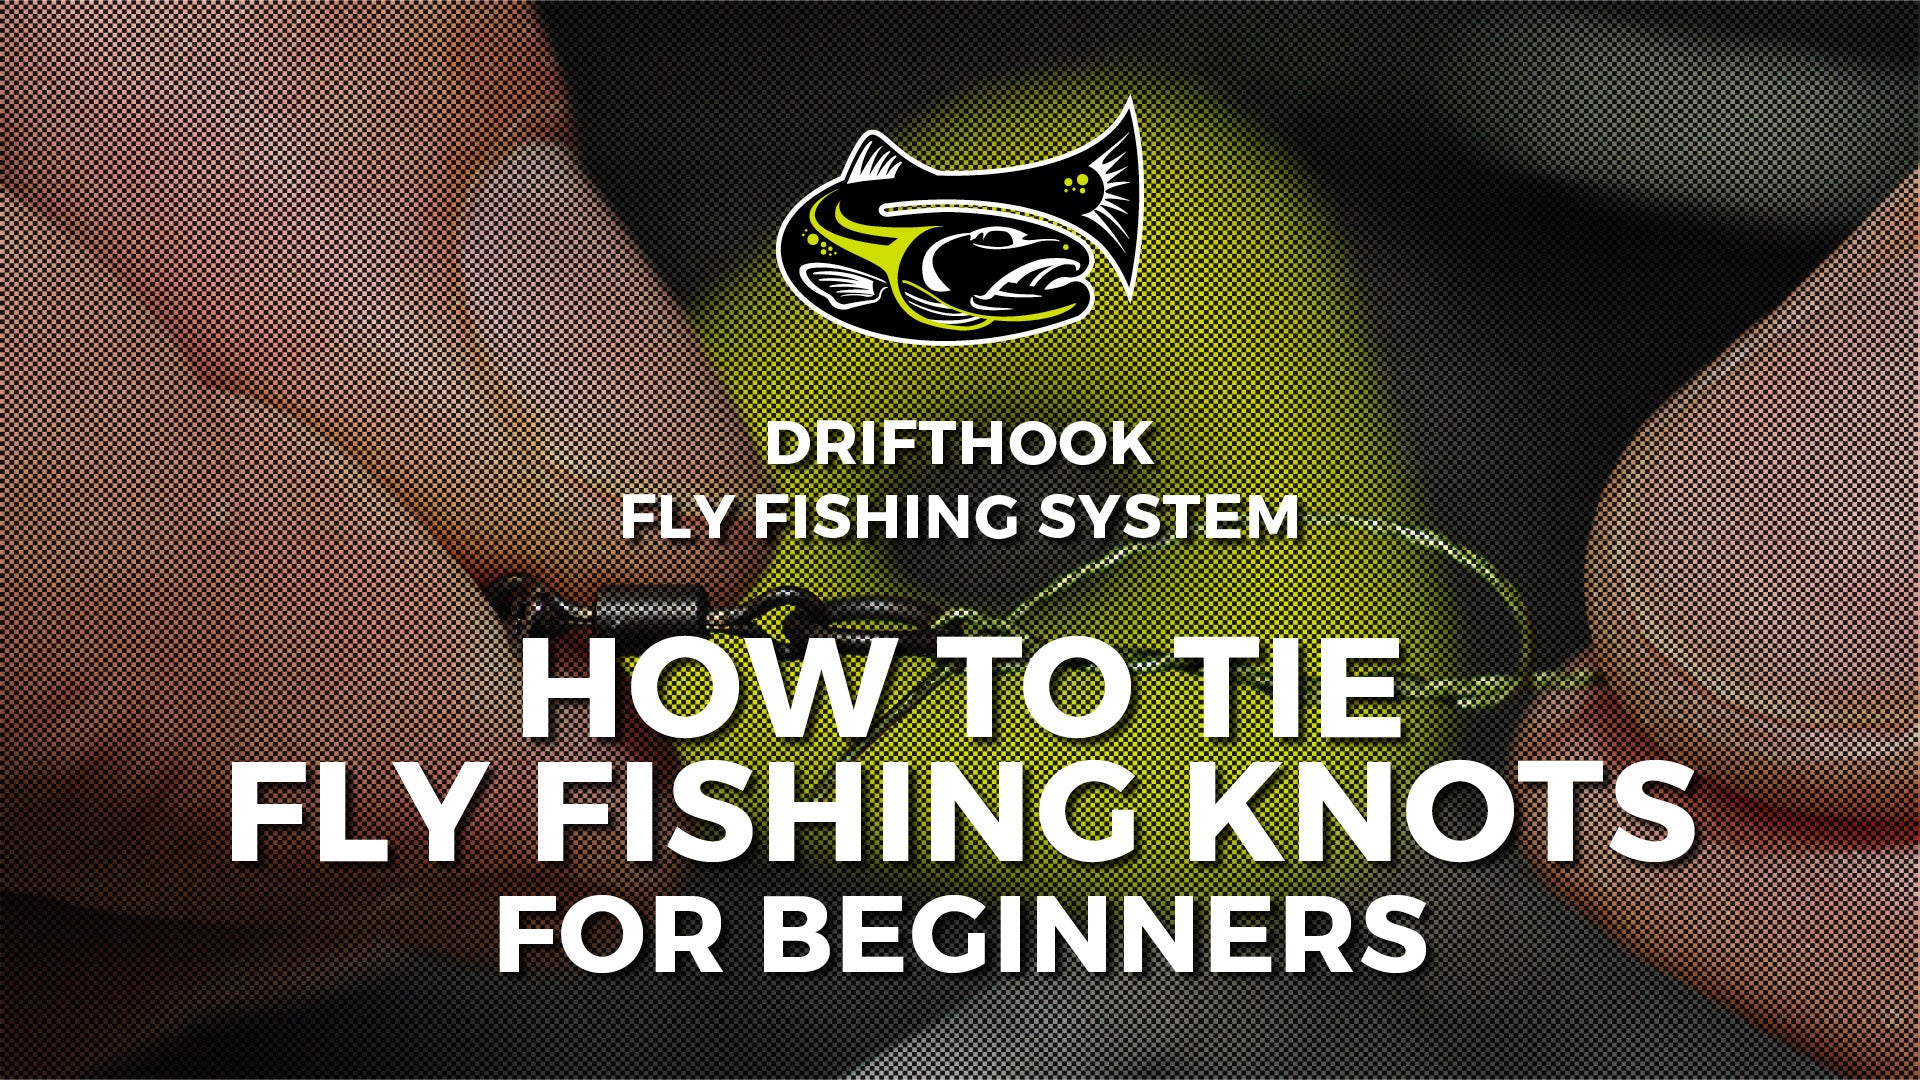 How to Tie Fly Fishing Knots for Beginners